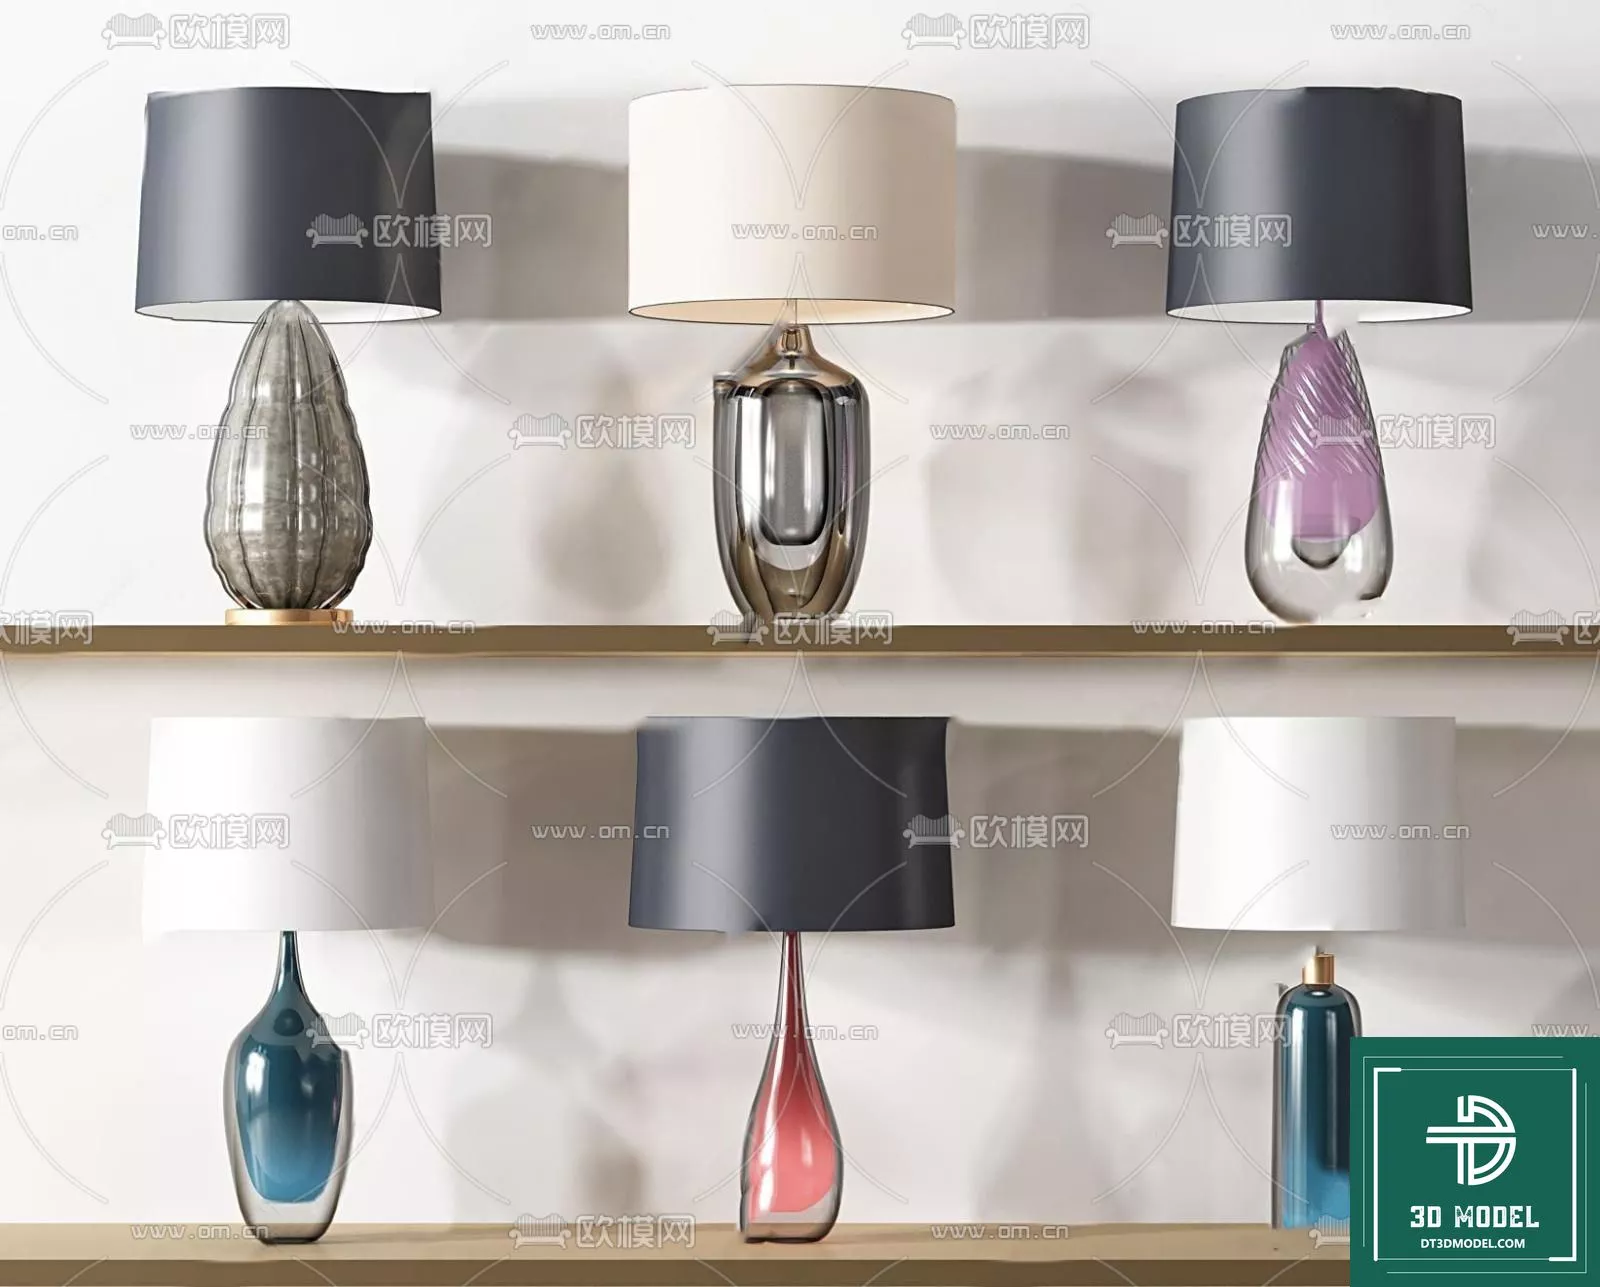 MODERN TABLE LAMP - SKETCHUP 3D MODEL - VRAY OR ENSCAPE - ID14543